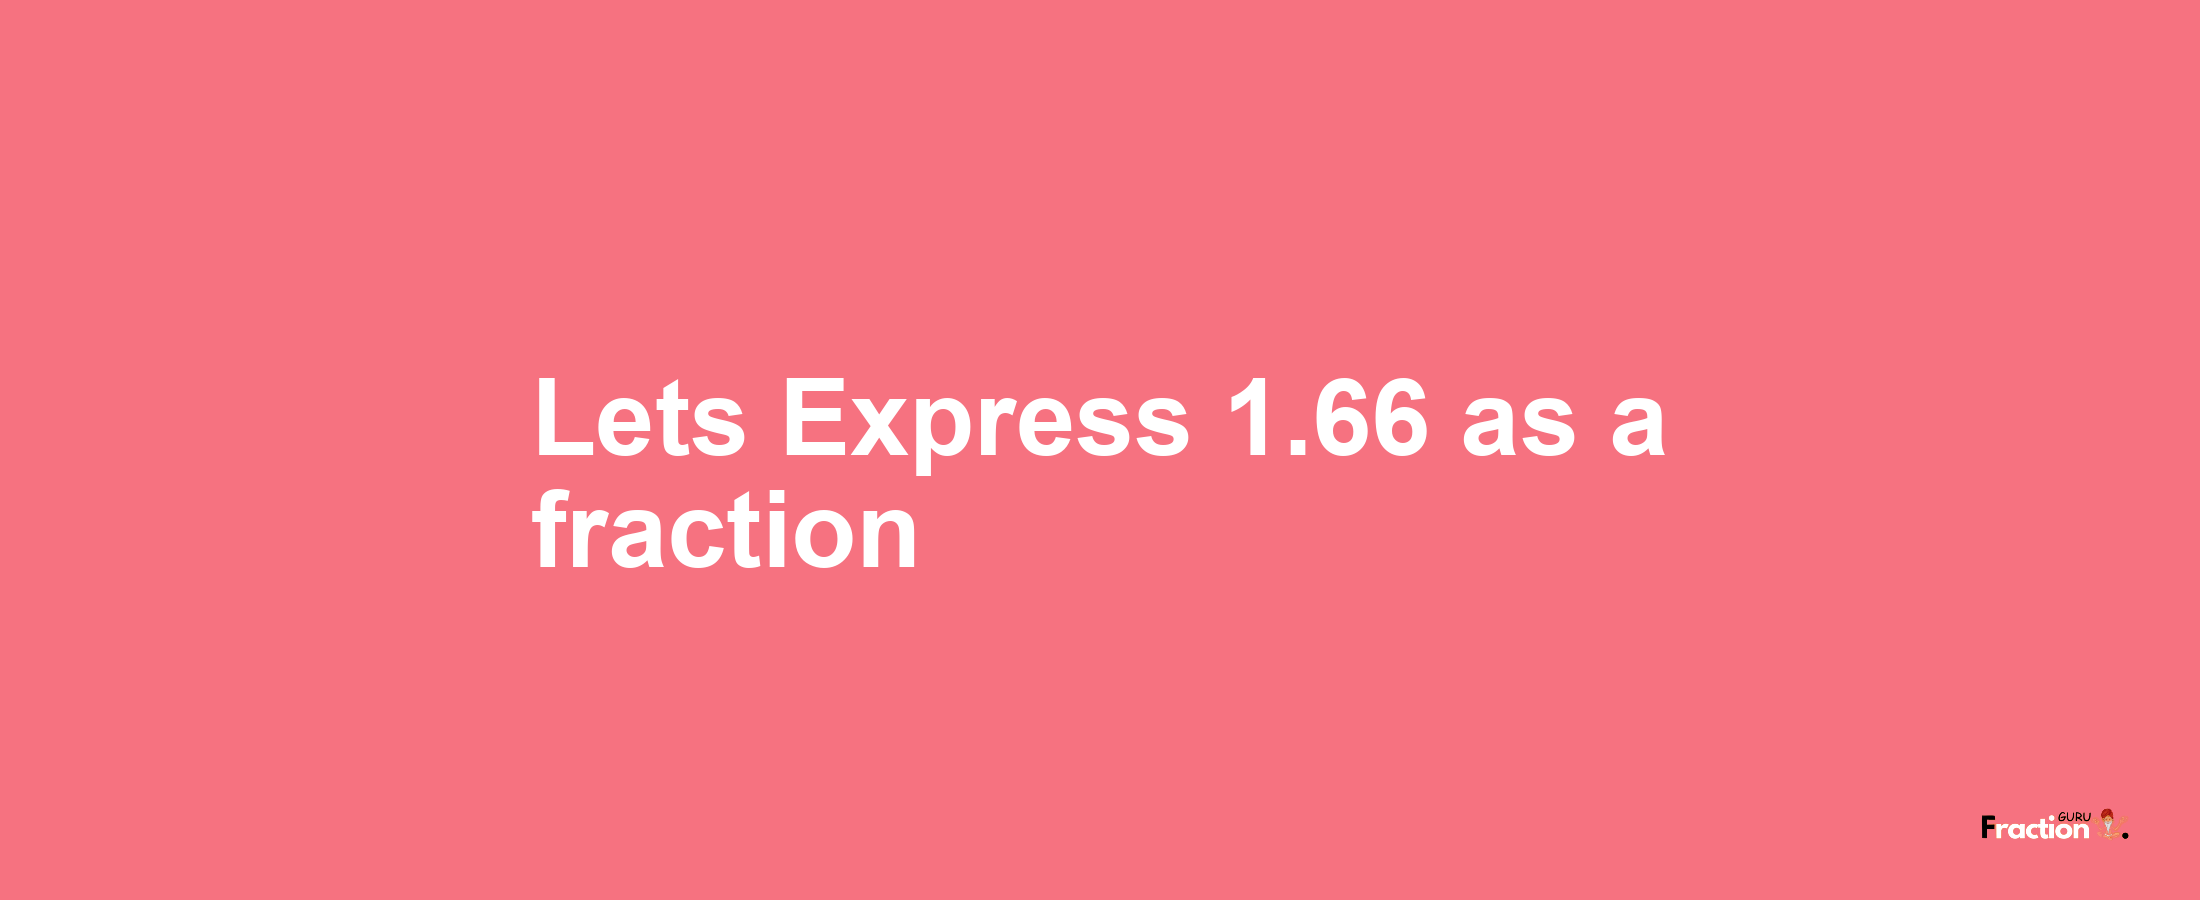 Lets Express 1.66 as afraction